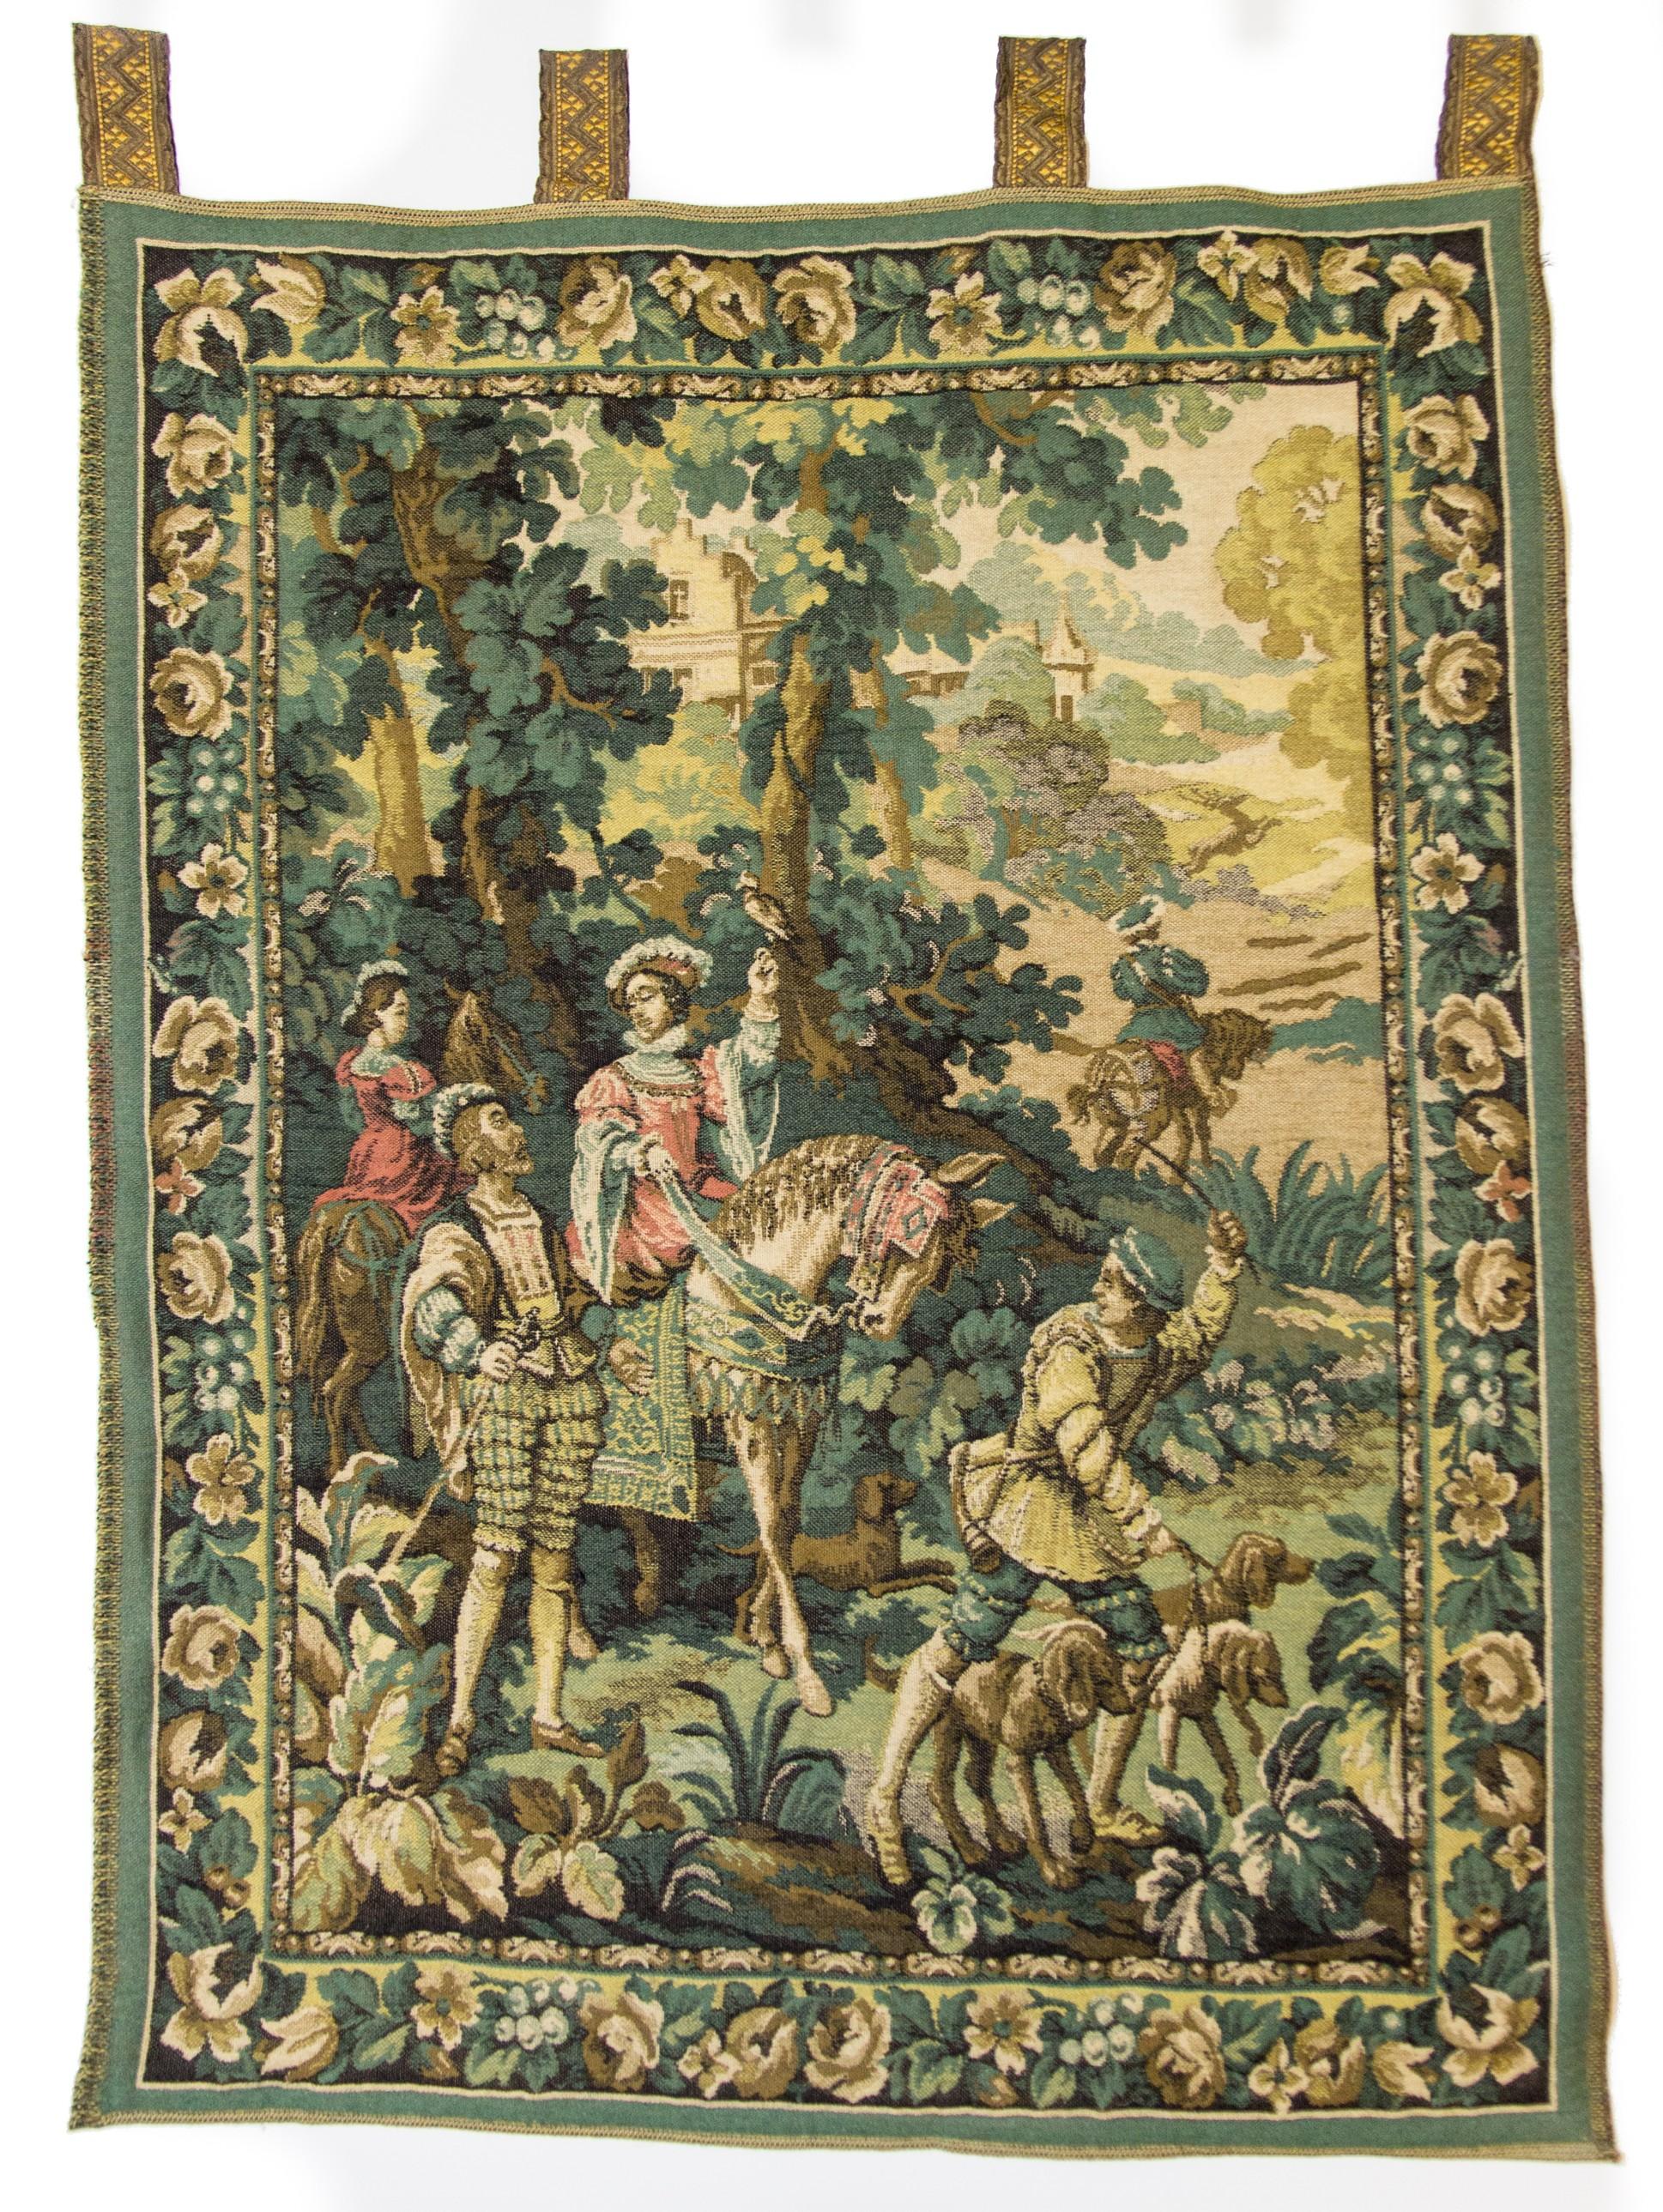 This colorful vintage tapestry shows the European hunting scene in the 18th century.
It is 100% wool quilted and comes with 4 loops for easy hanging. 
This wall-hanging tapestry is made in Belgium approx. in the second half of the 20th Century; it